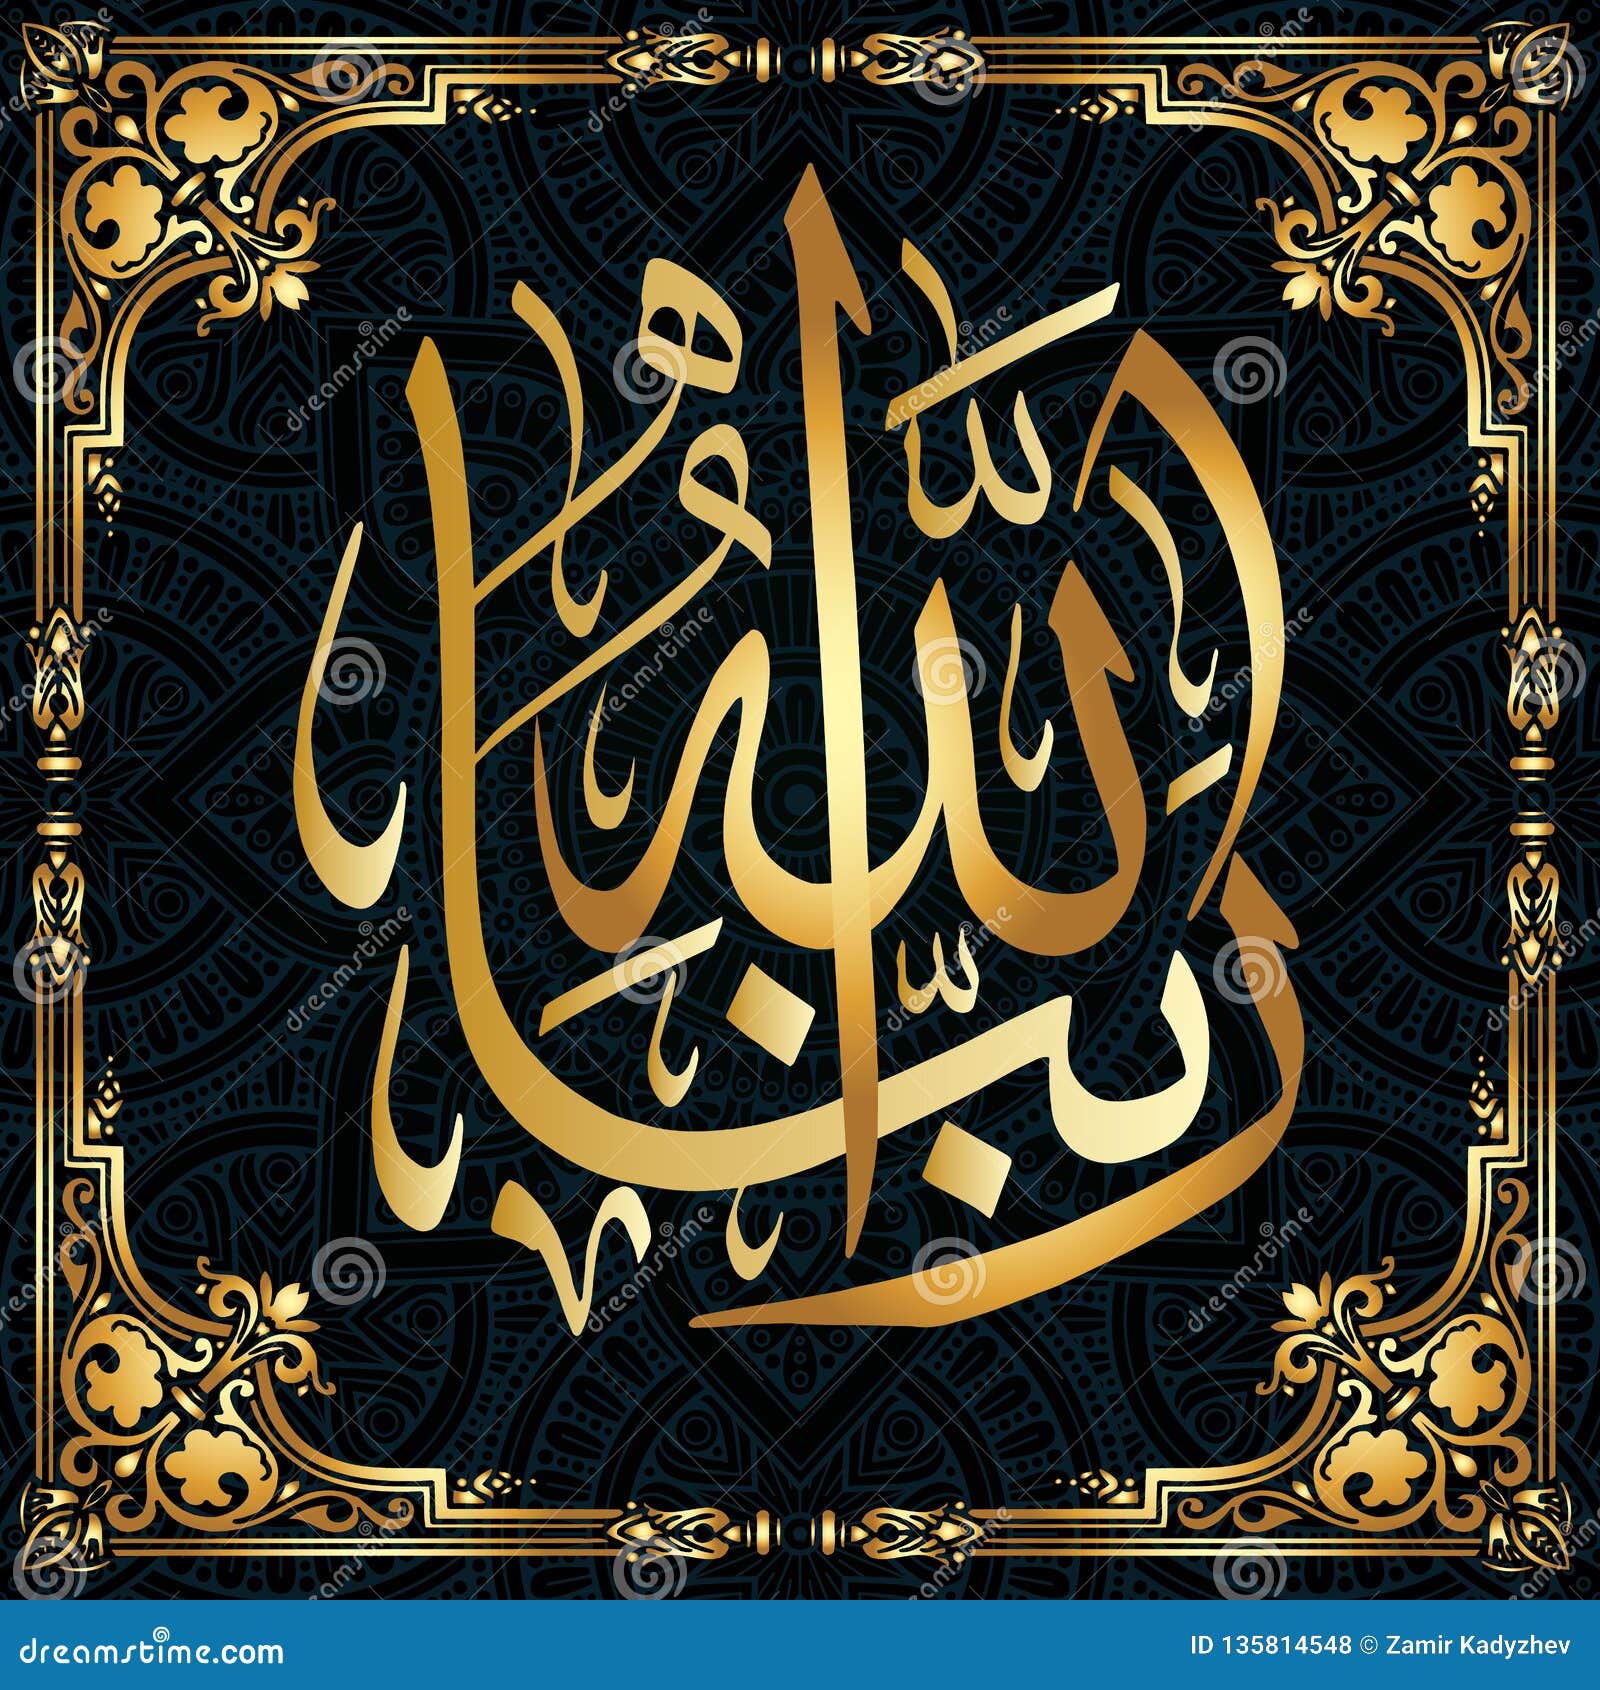 rabbanallah for the  of islamic holidays. this calligraphy means our lord allah